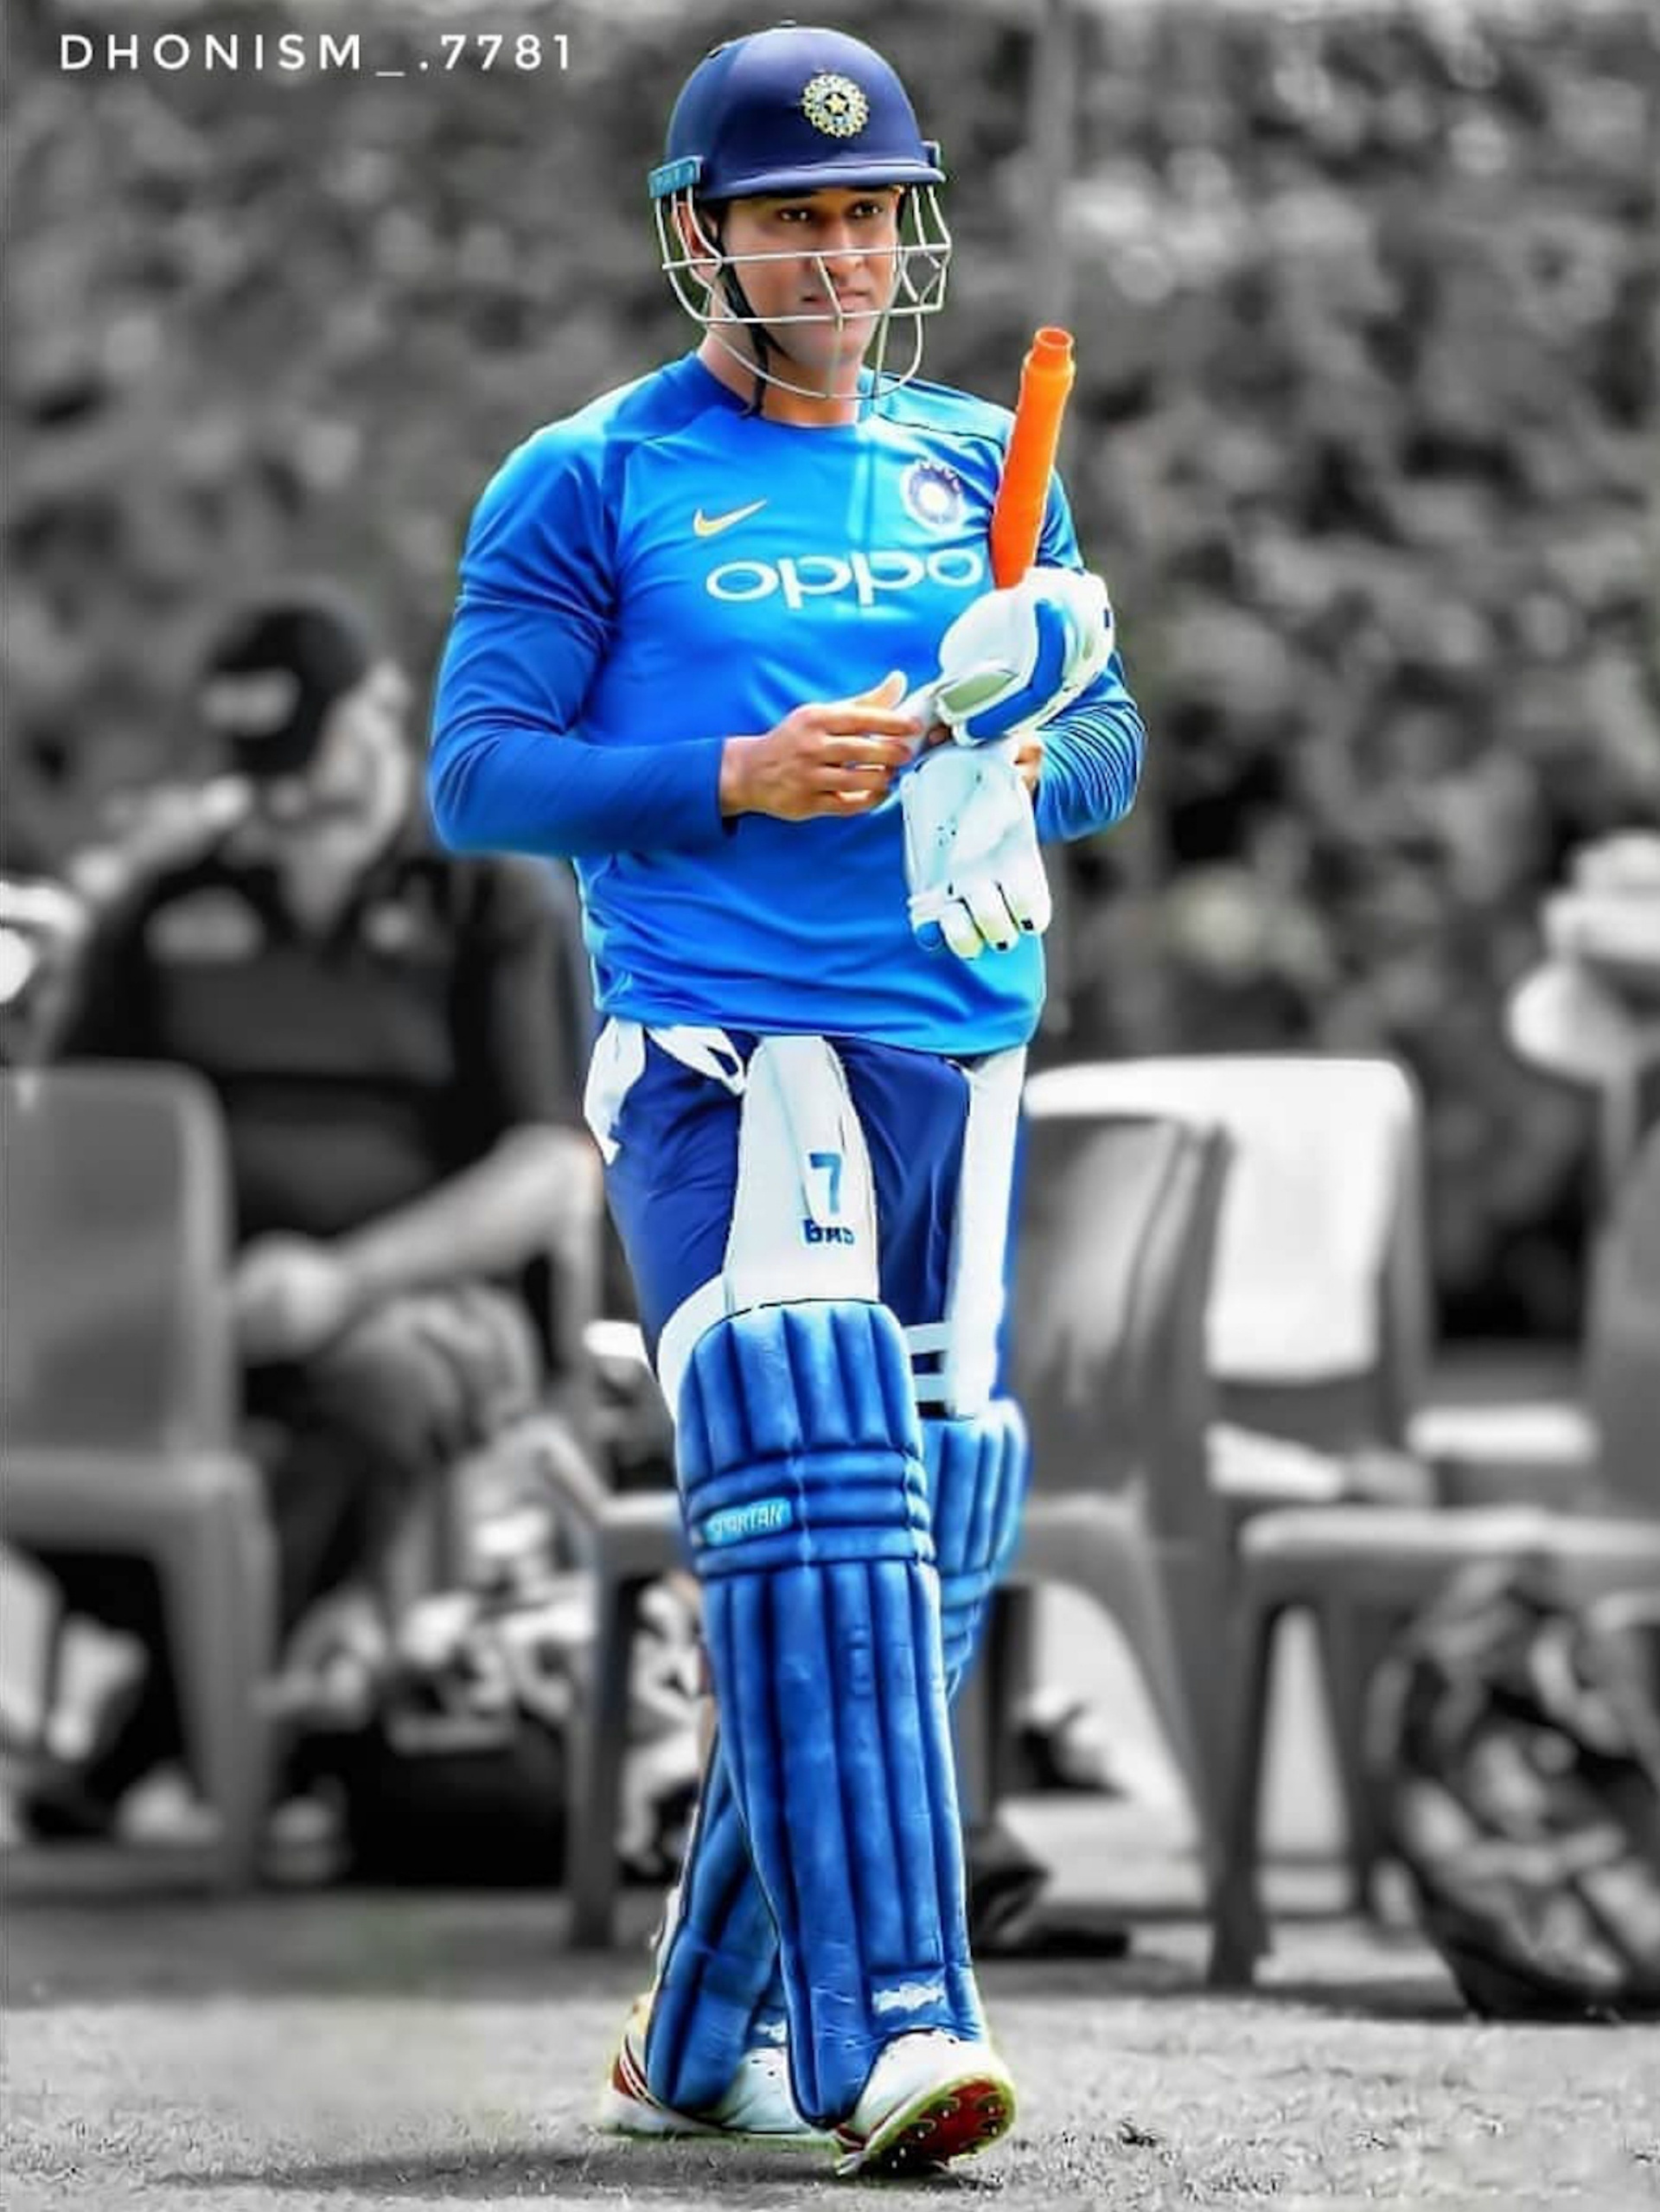 Ms Dhoni Wearing Gloves